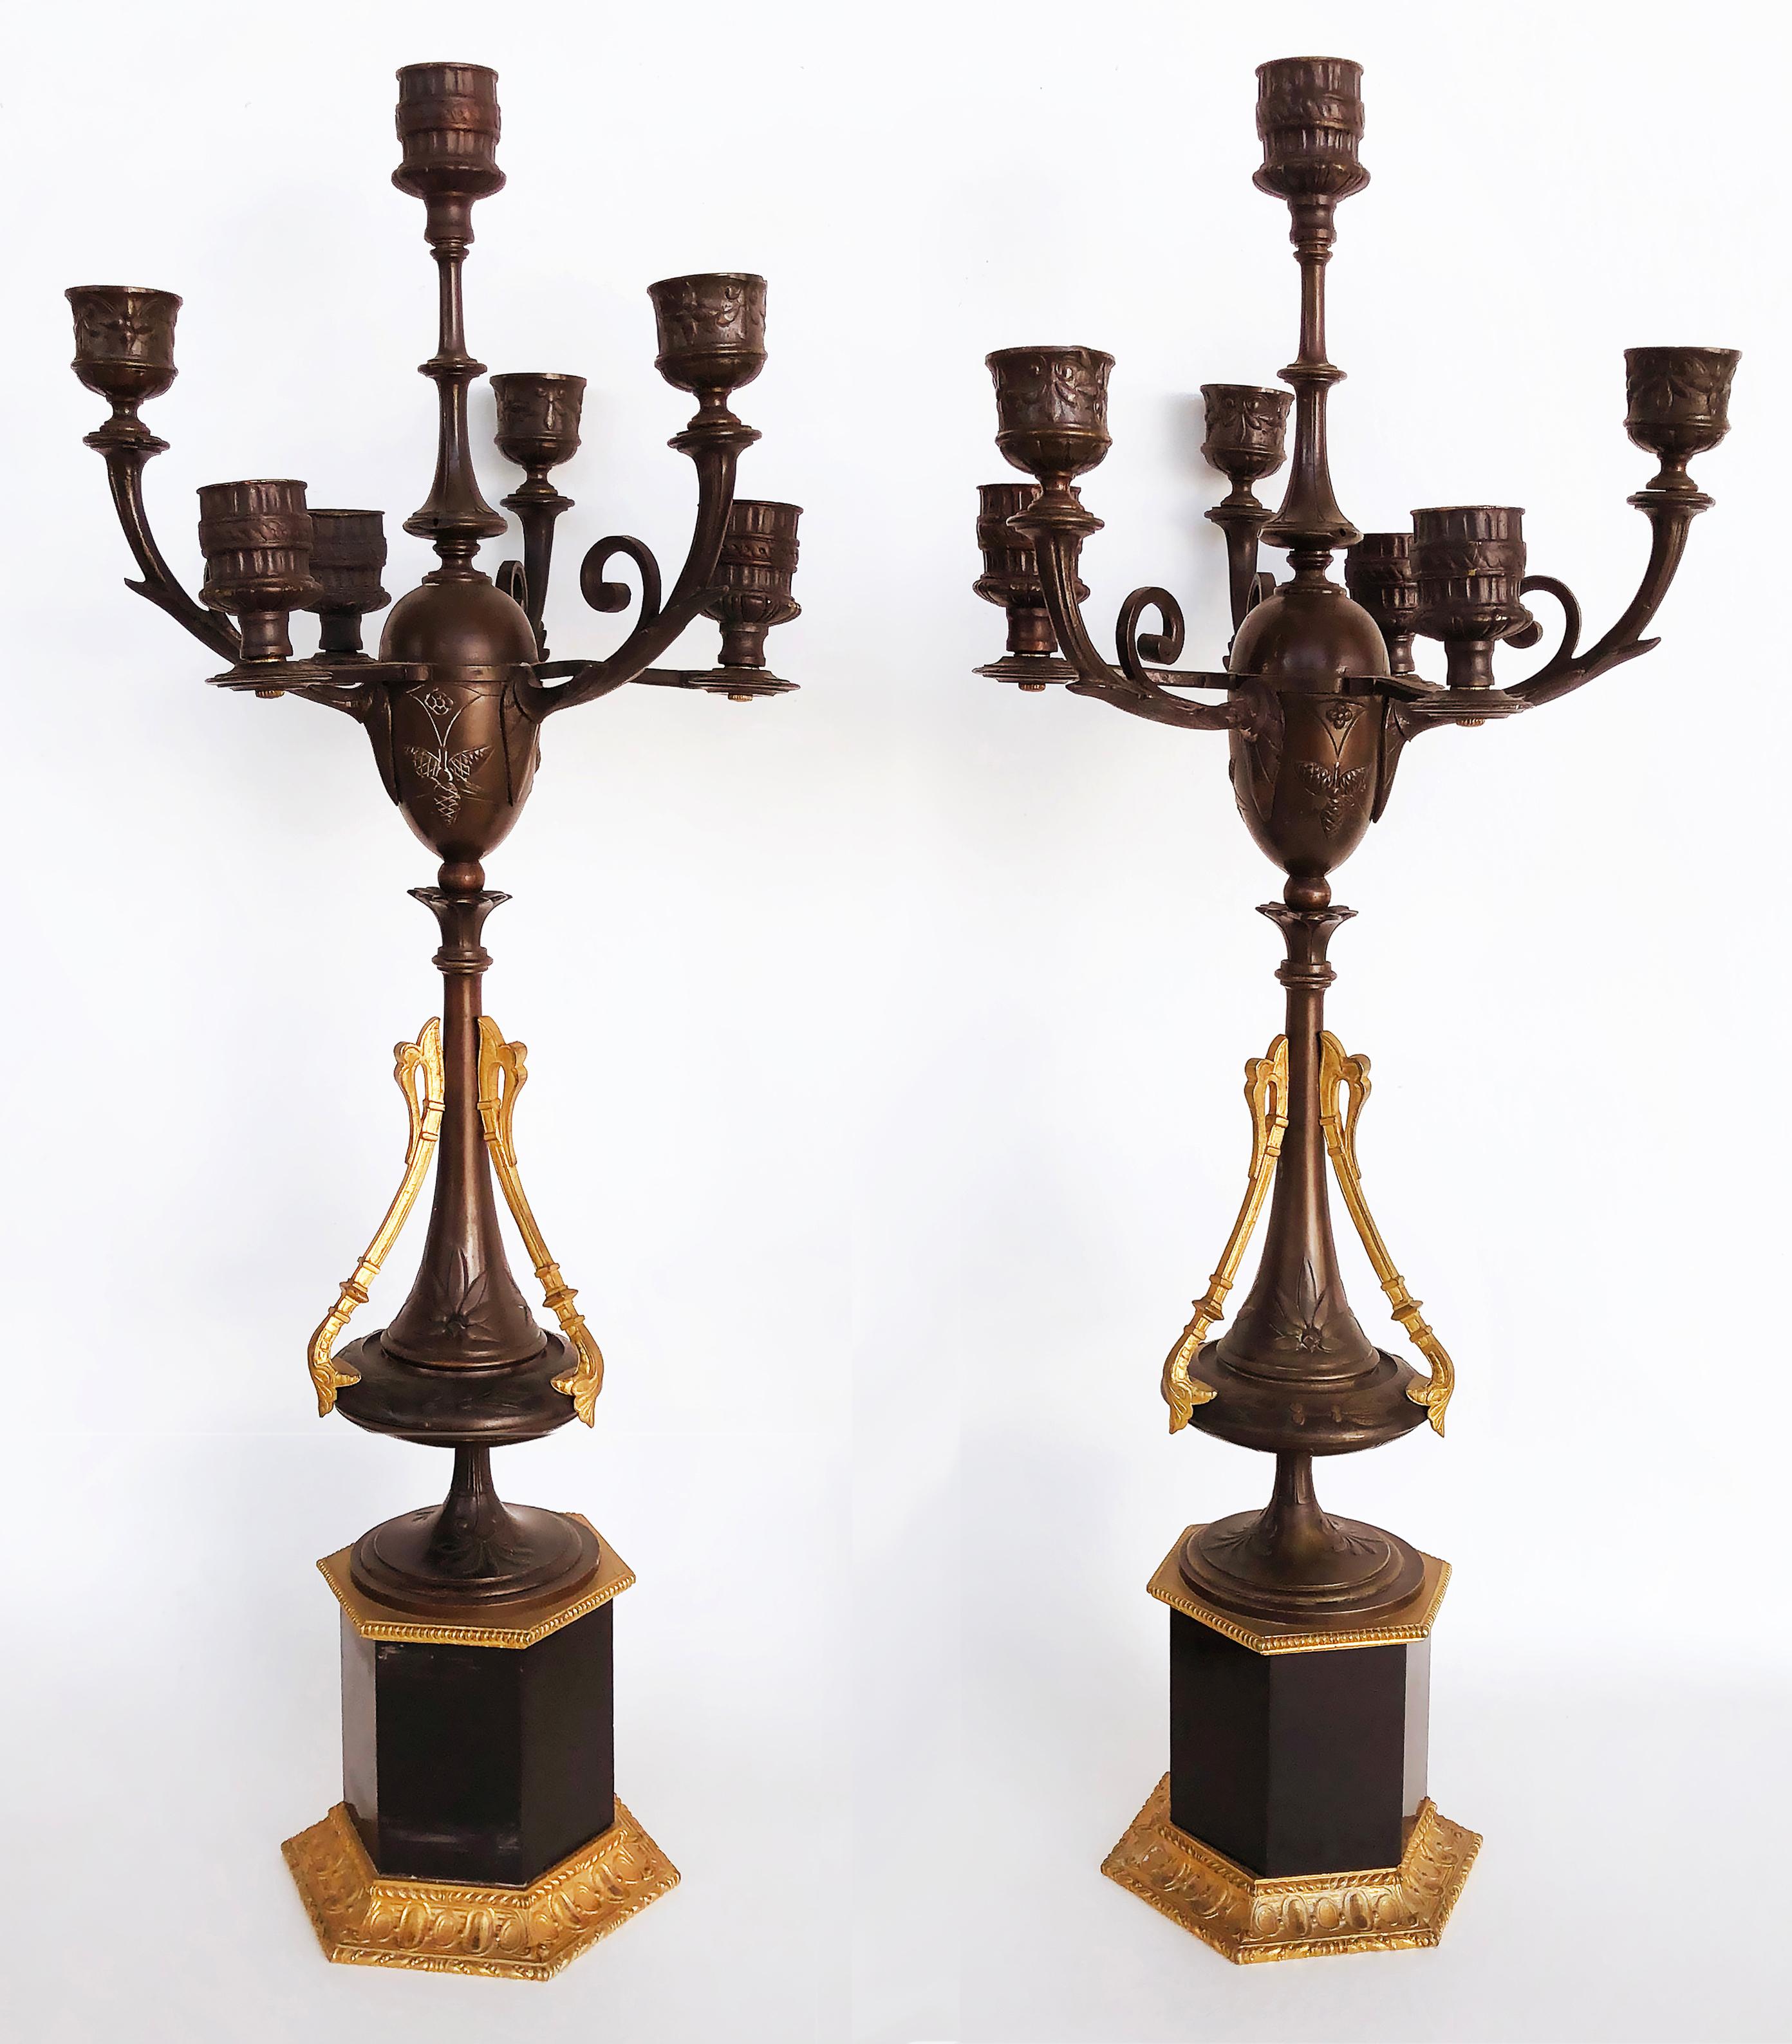 Antique Gilt Bronze Candelabra with Granite Bases, Pair For Sale 2